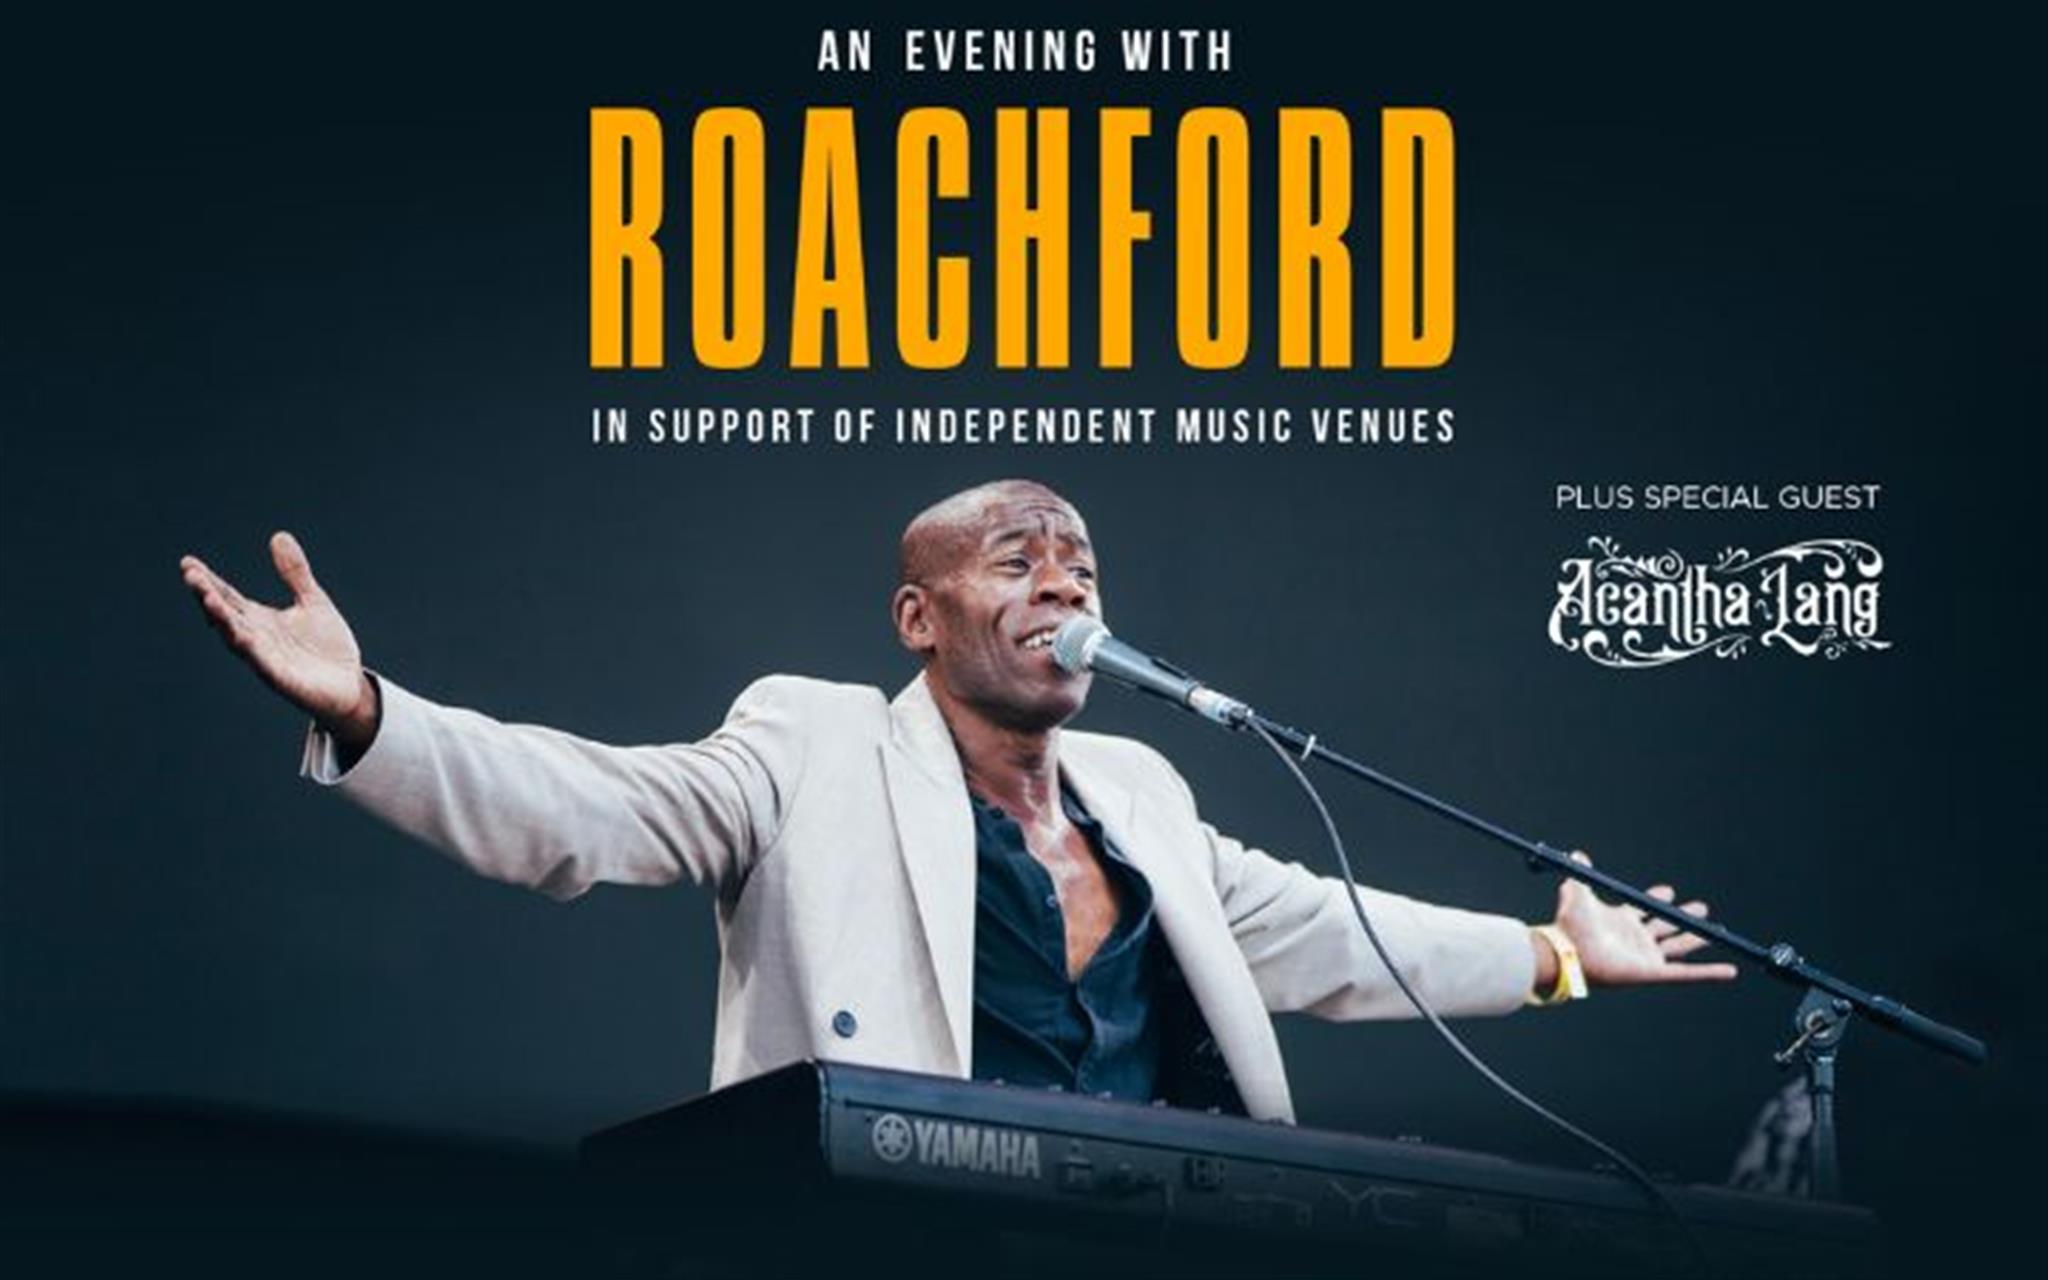 Roachford with special guest Acantha Lang